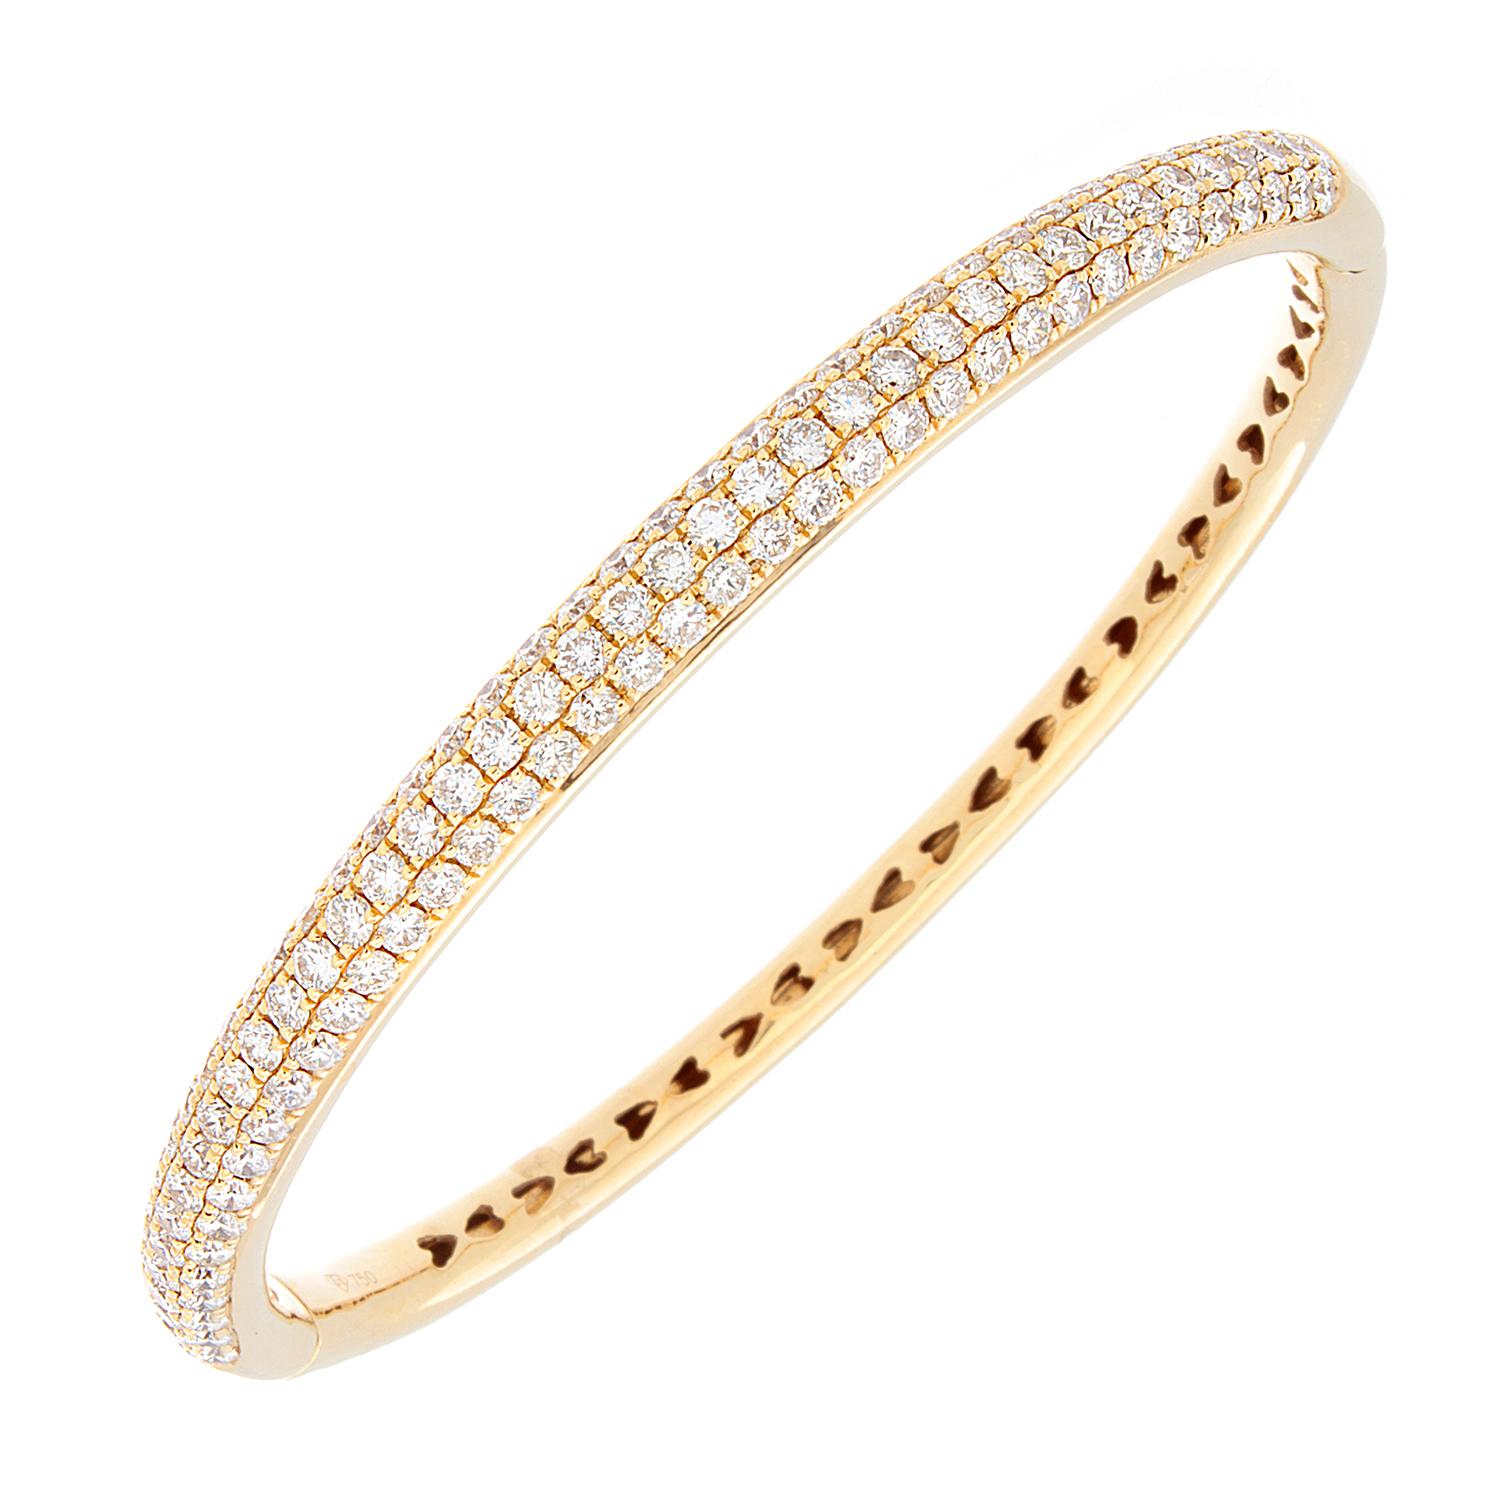 A sparkling bracelet featuring just under 4 carats of VS quality diamonds set in 18K yellow gold with a secure fastening lock enclosure. A lovely piece to wear everyday or dress up in an evening gown. 

Wrist Size: 6 ½ inches  
